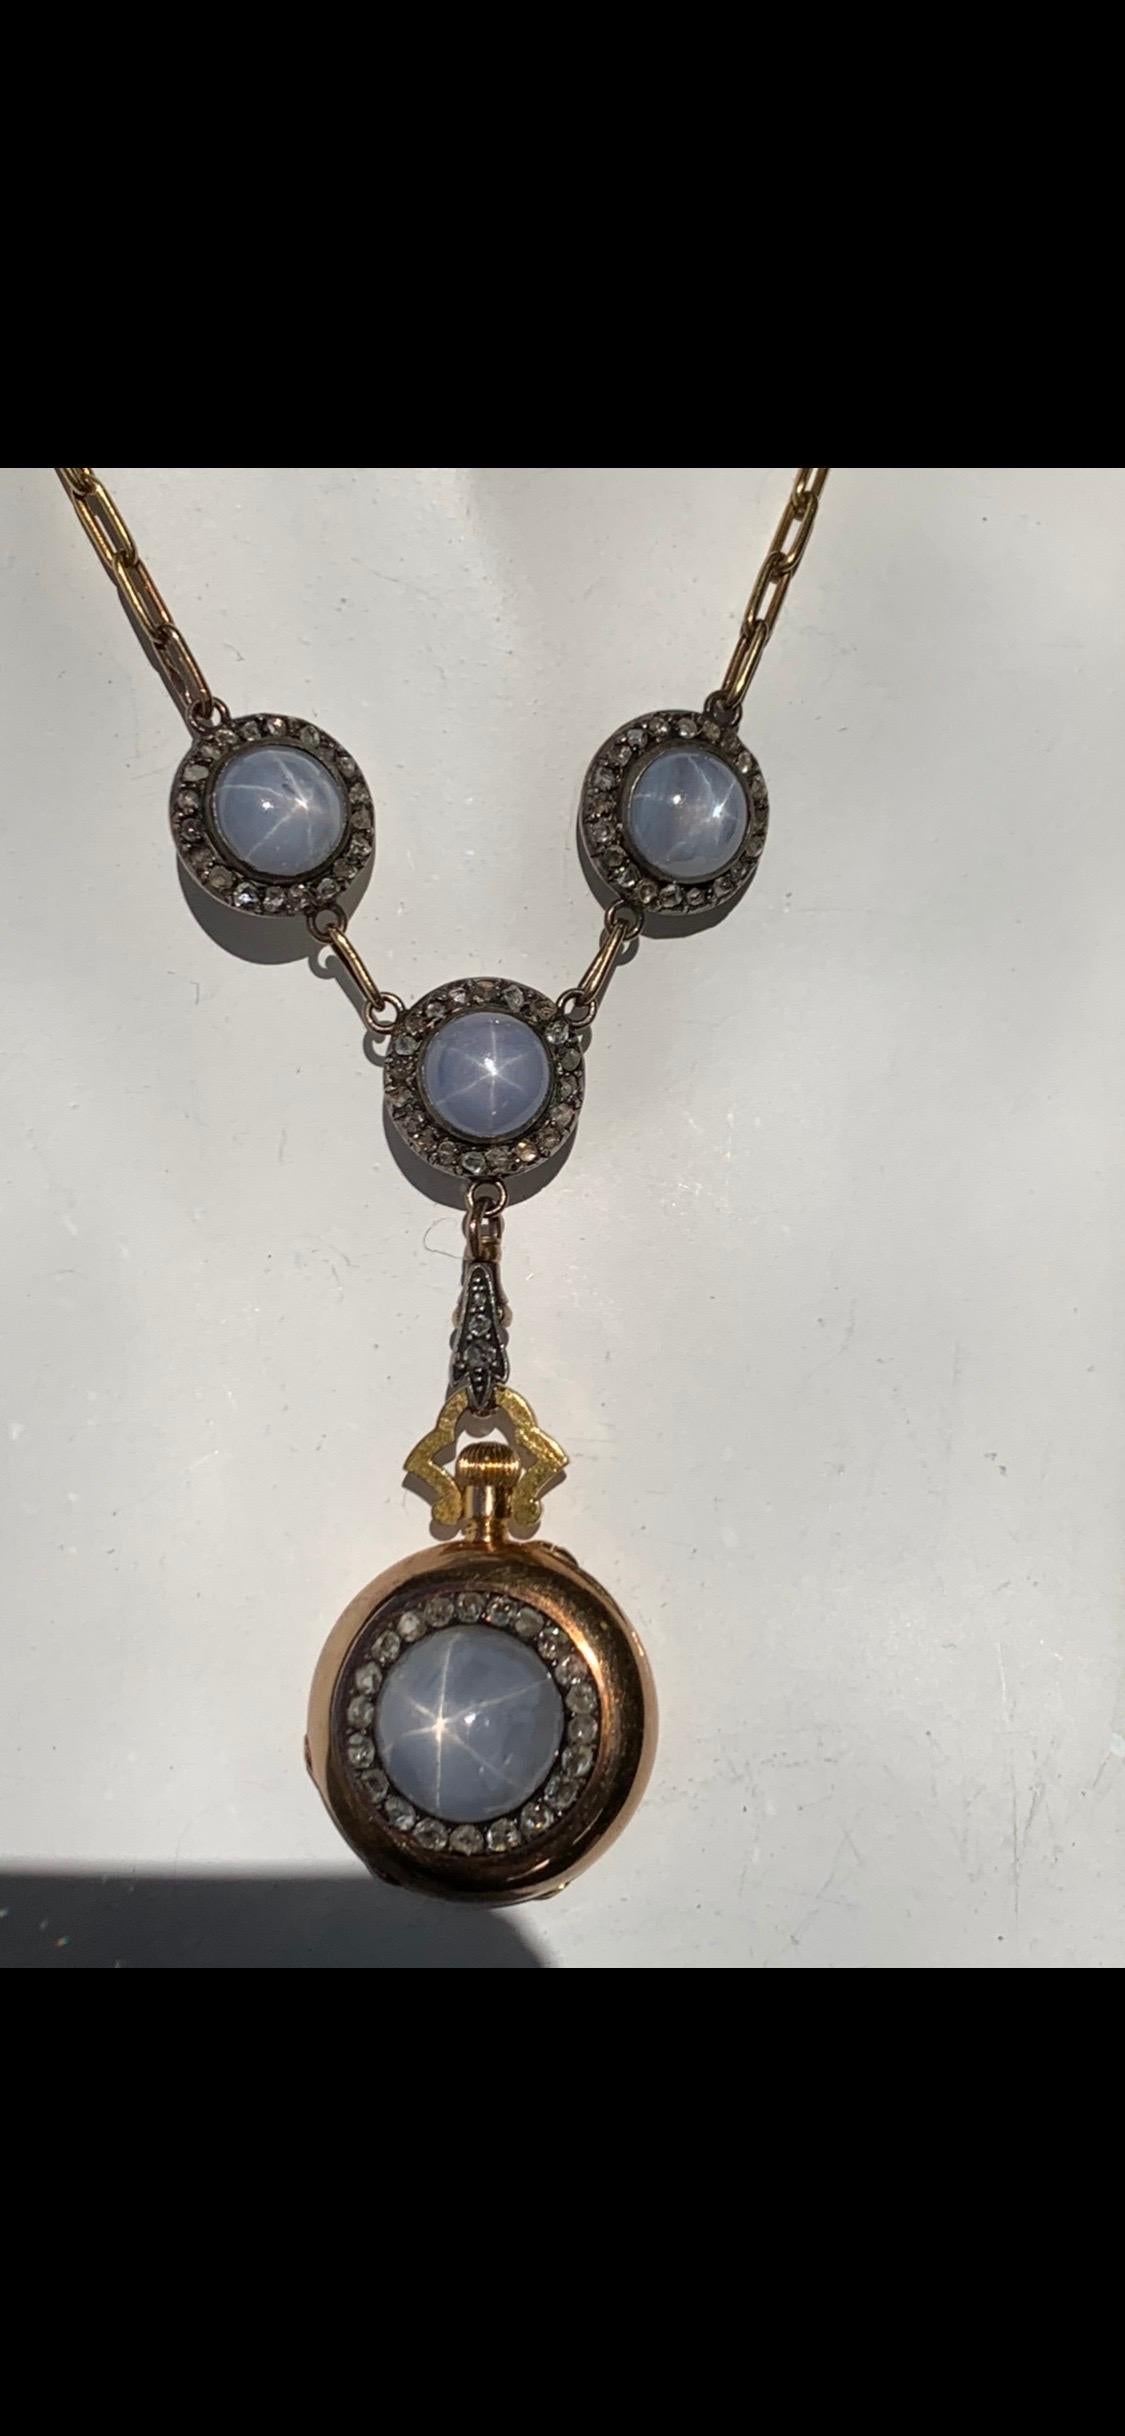 Very Rare Gold Vintage Original Boucheron necklace set with four matching cabochon star sapphires, including the removable matching pendant with a reverse CLOCK. These pieces are each framed with circular cut diamonds. Circa 1900.  

